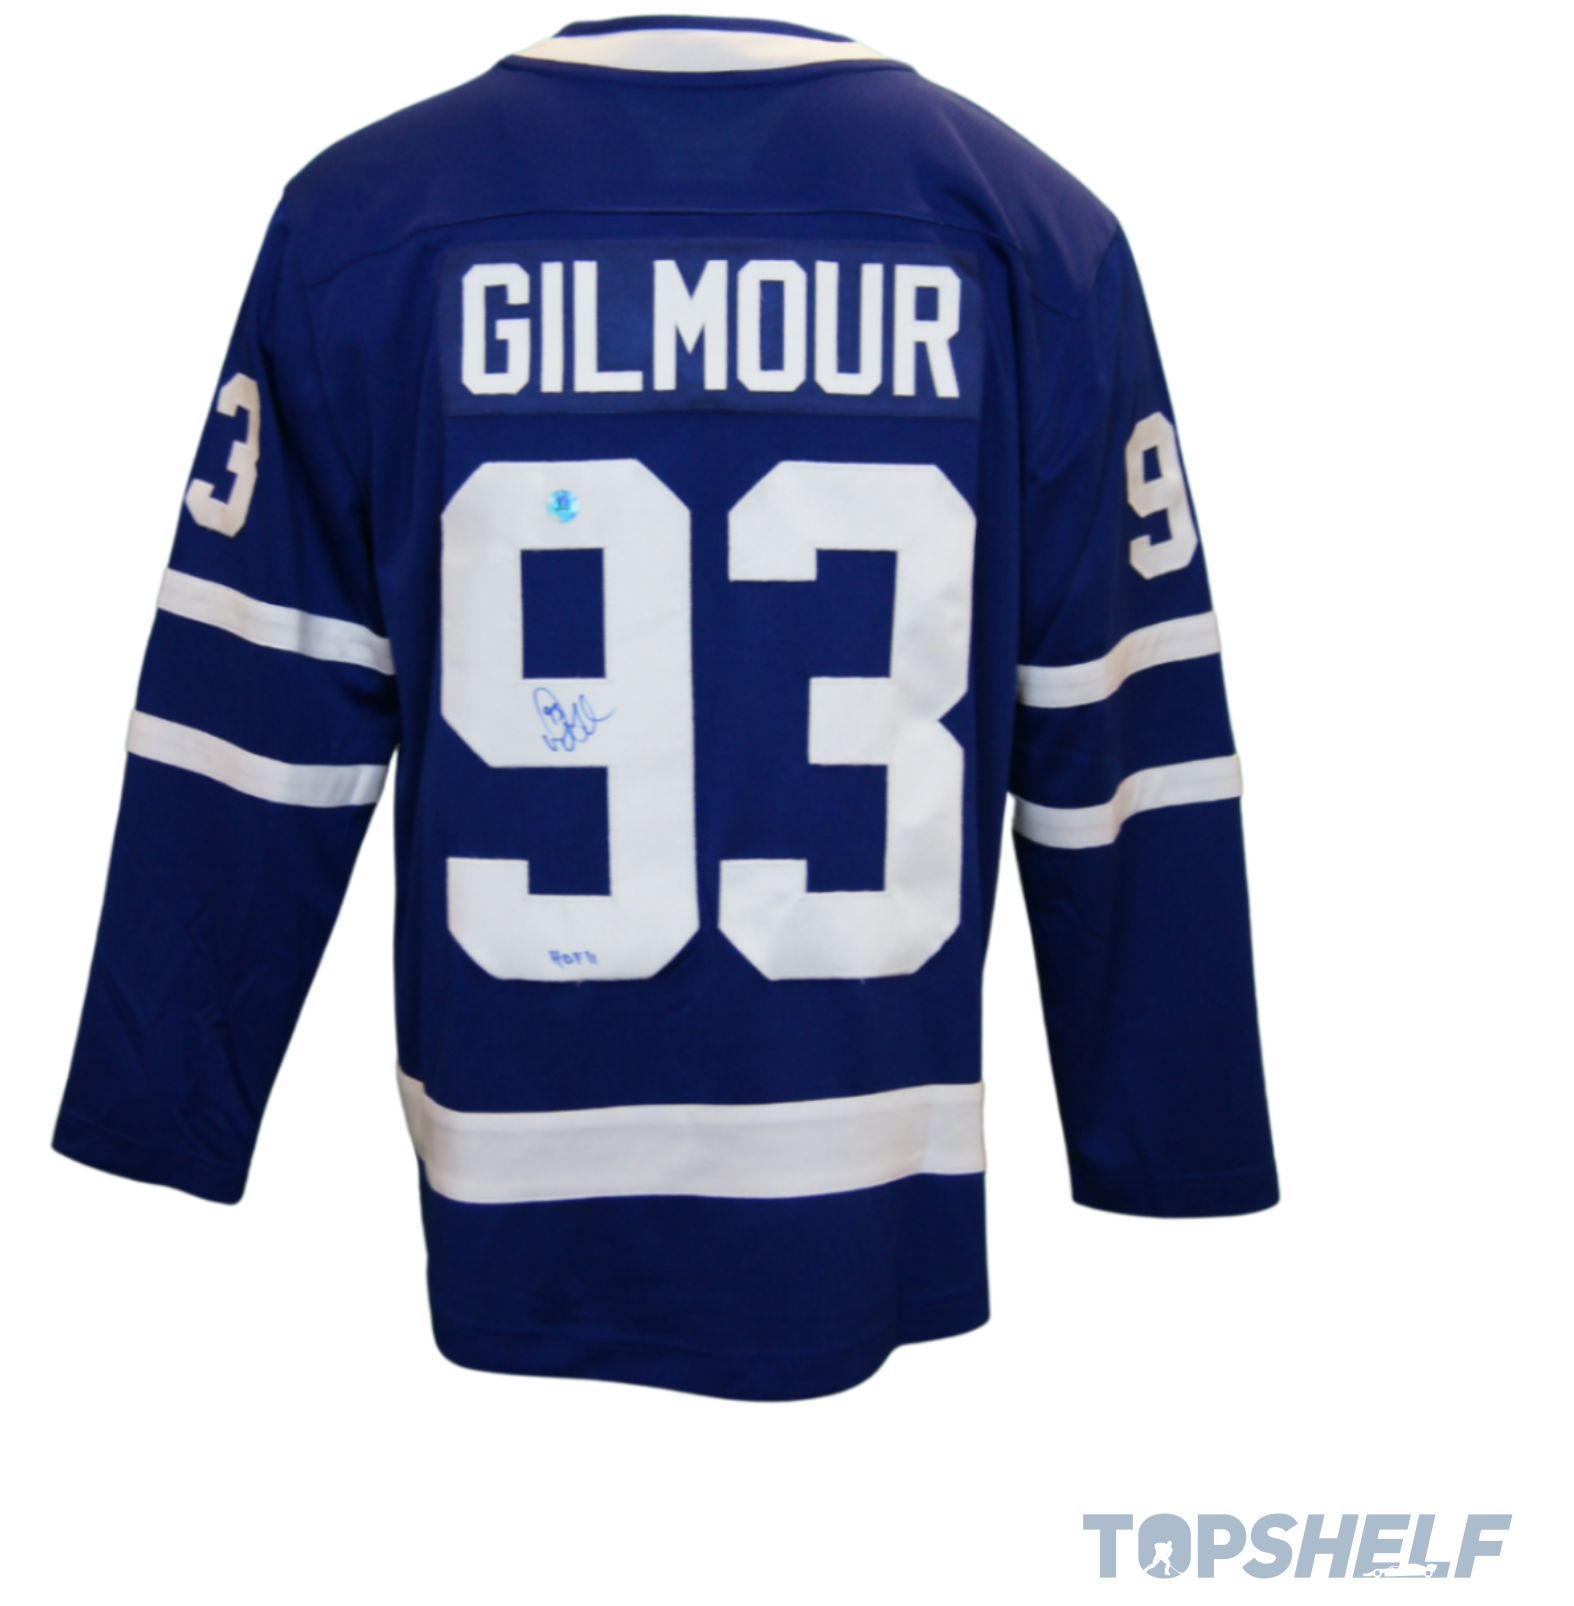 Doug Gilmour Signed Official Jersey